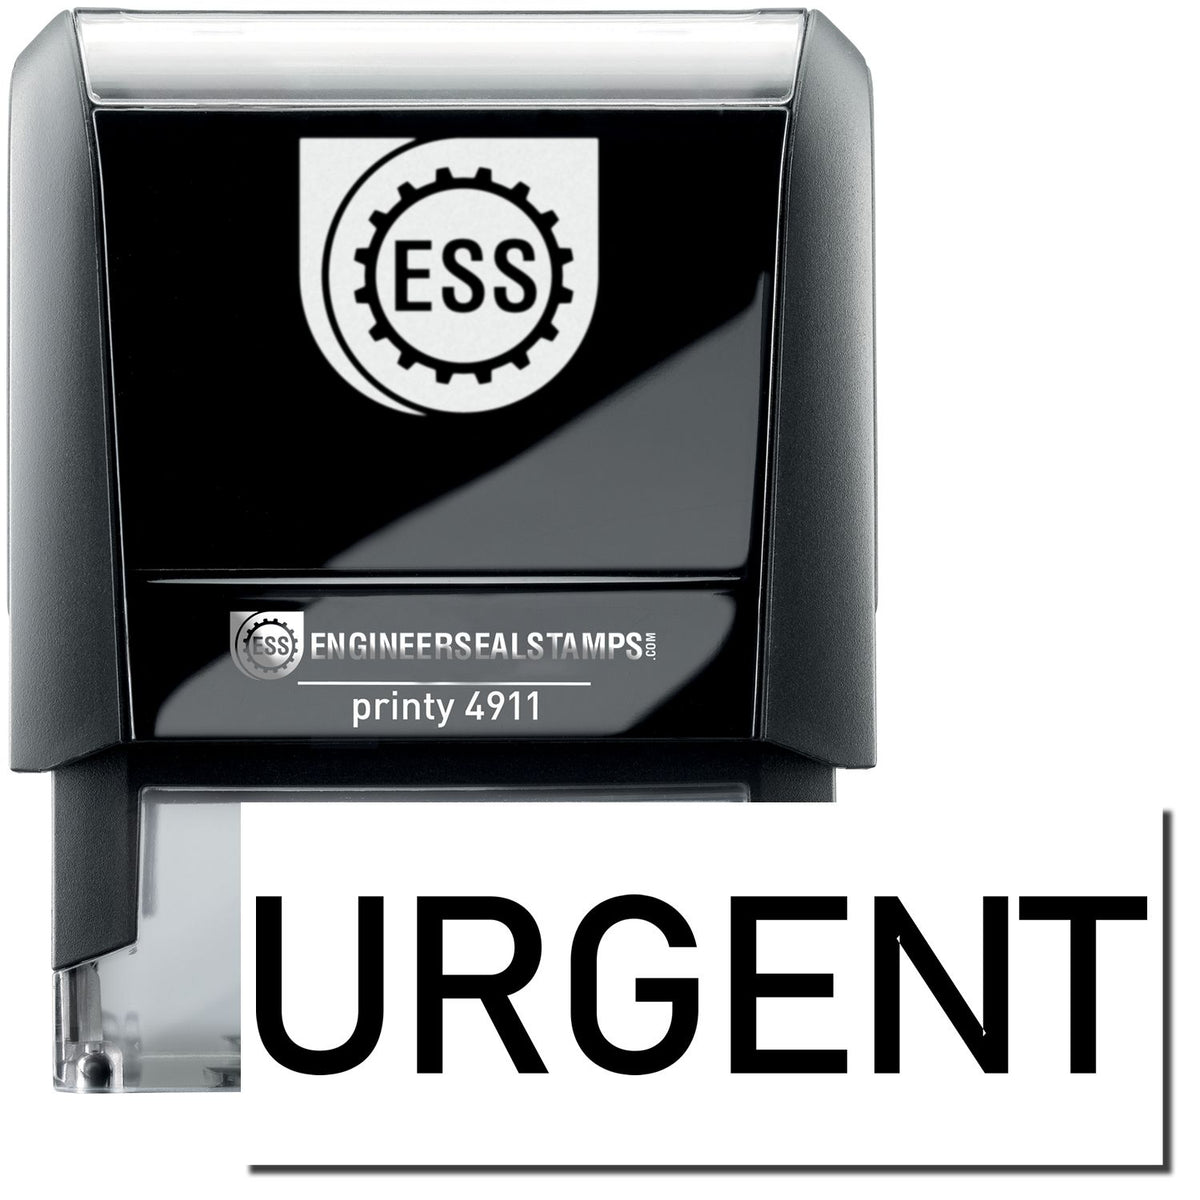 A self-inking stamp with a stamped image showing how the text &quot;URGENT&quot; in a narrow font is displayed after stamping.